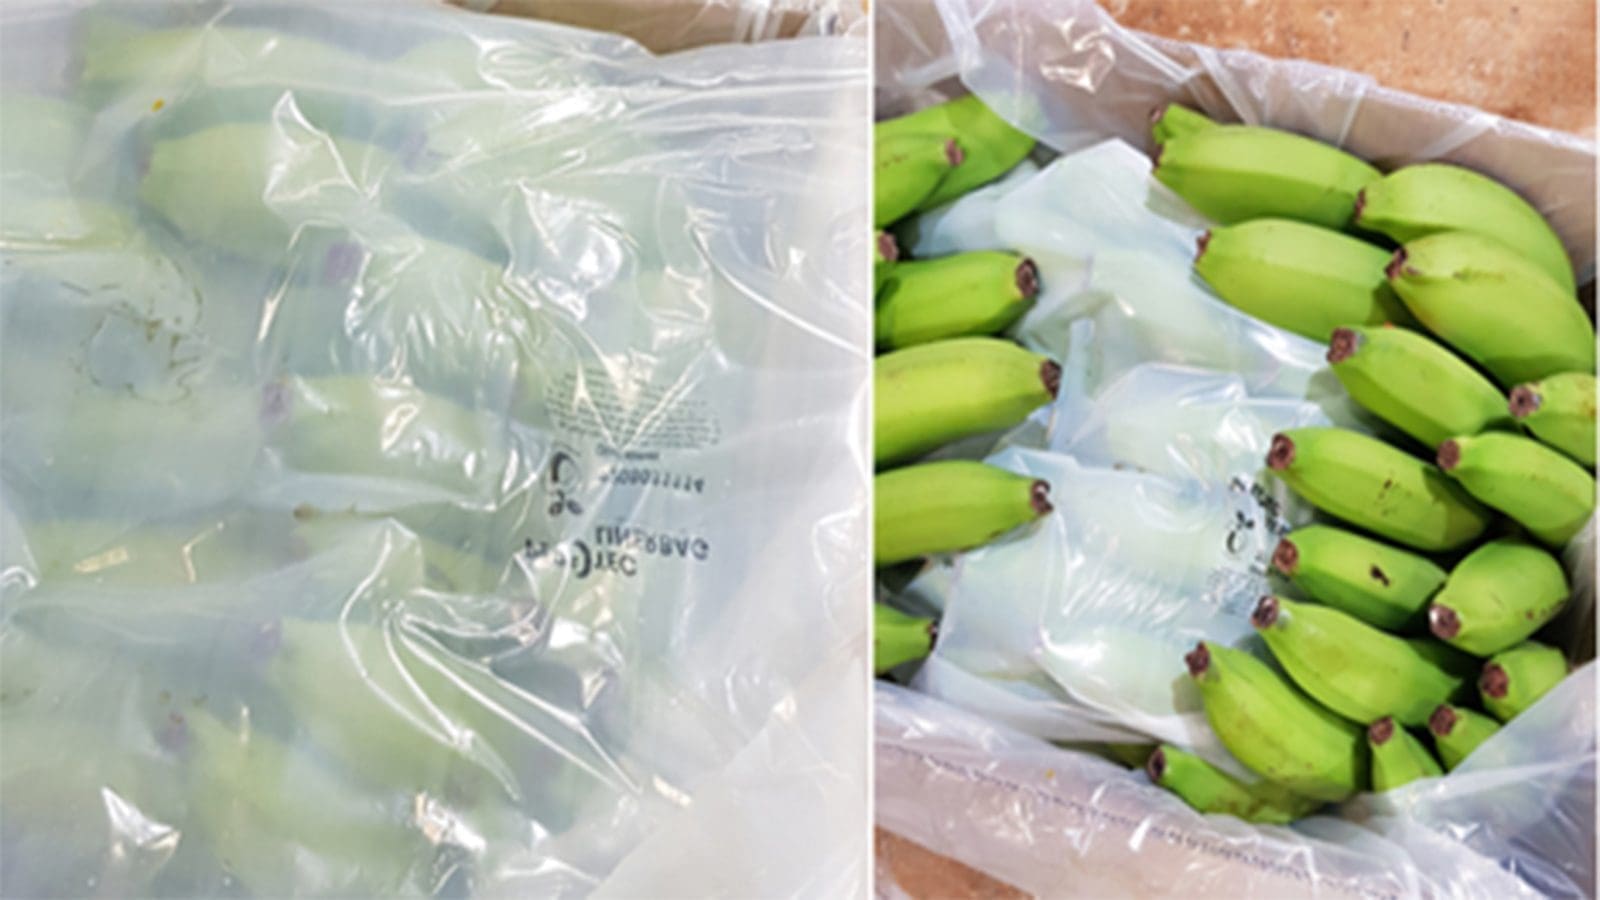 Perfo Tec invents laser micro-perforated bags to extend produce shelf life